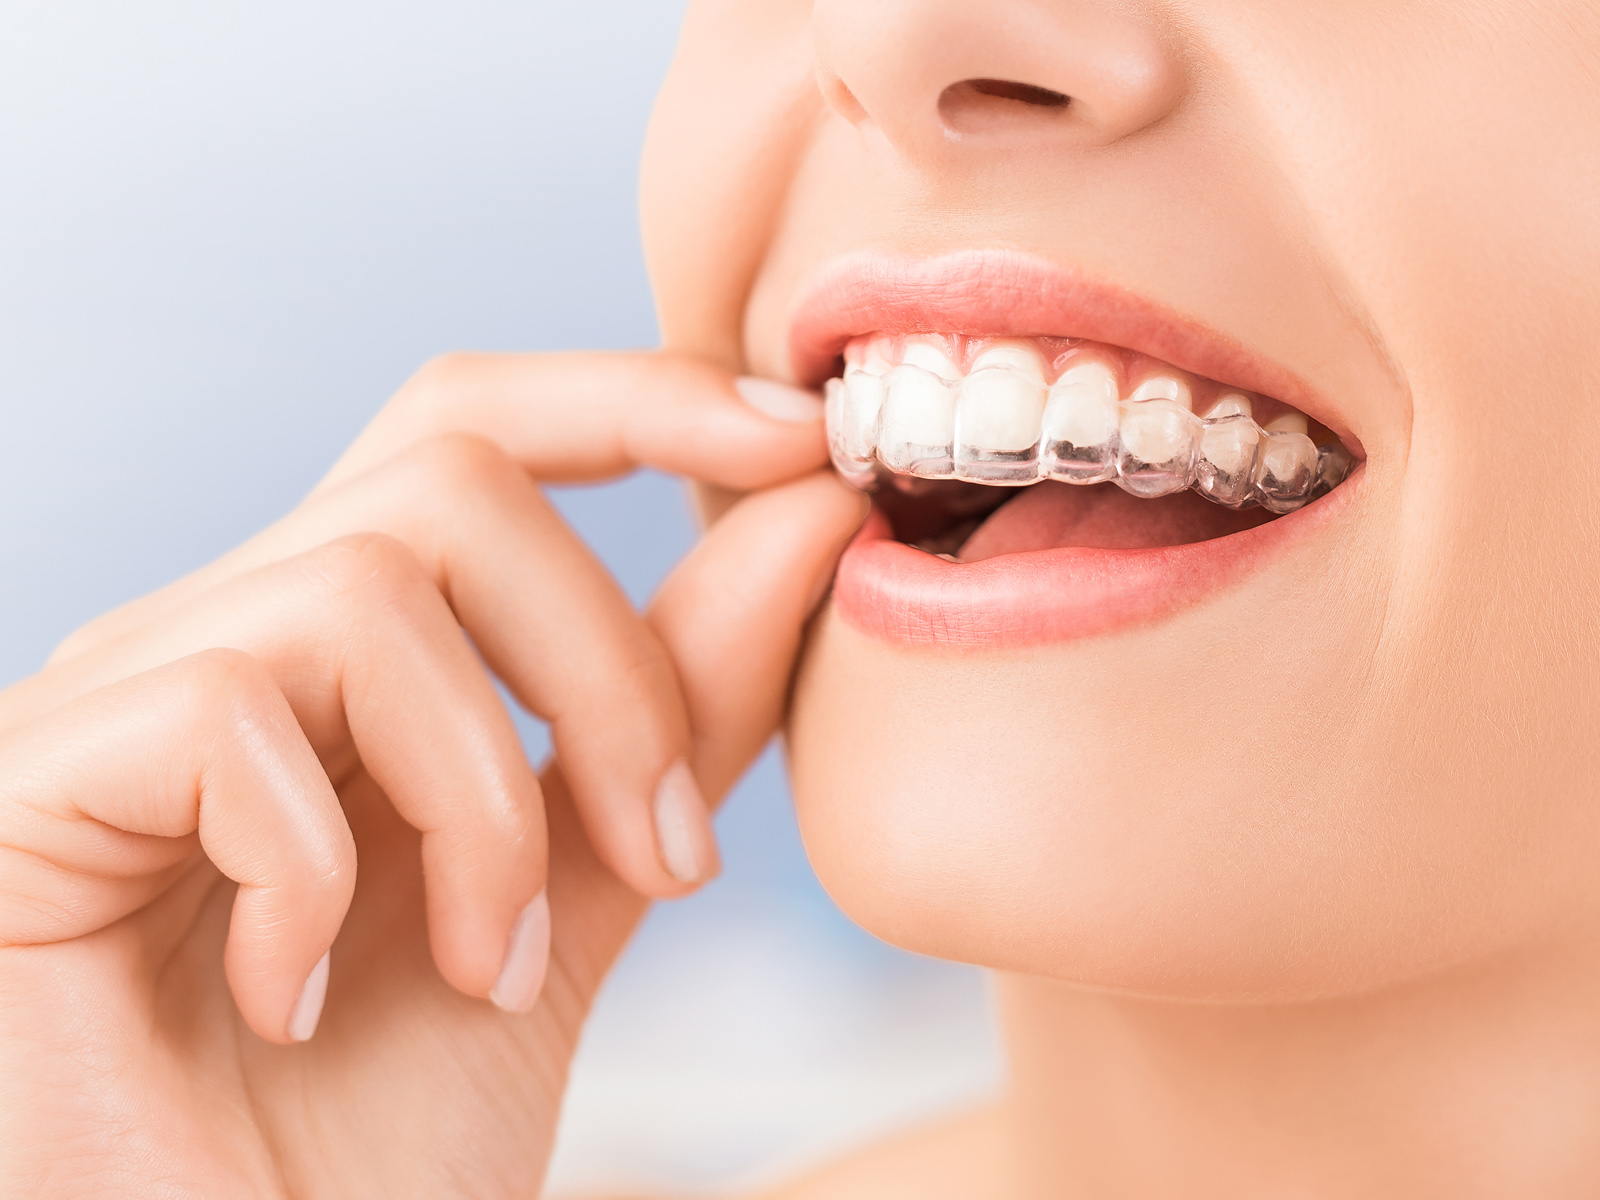 How long does it take Invisalign to work?